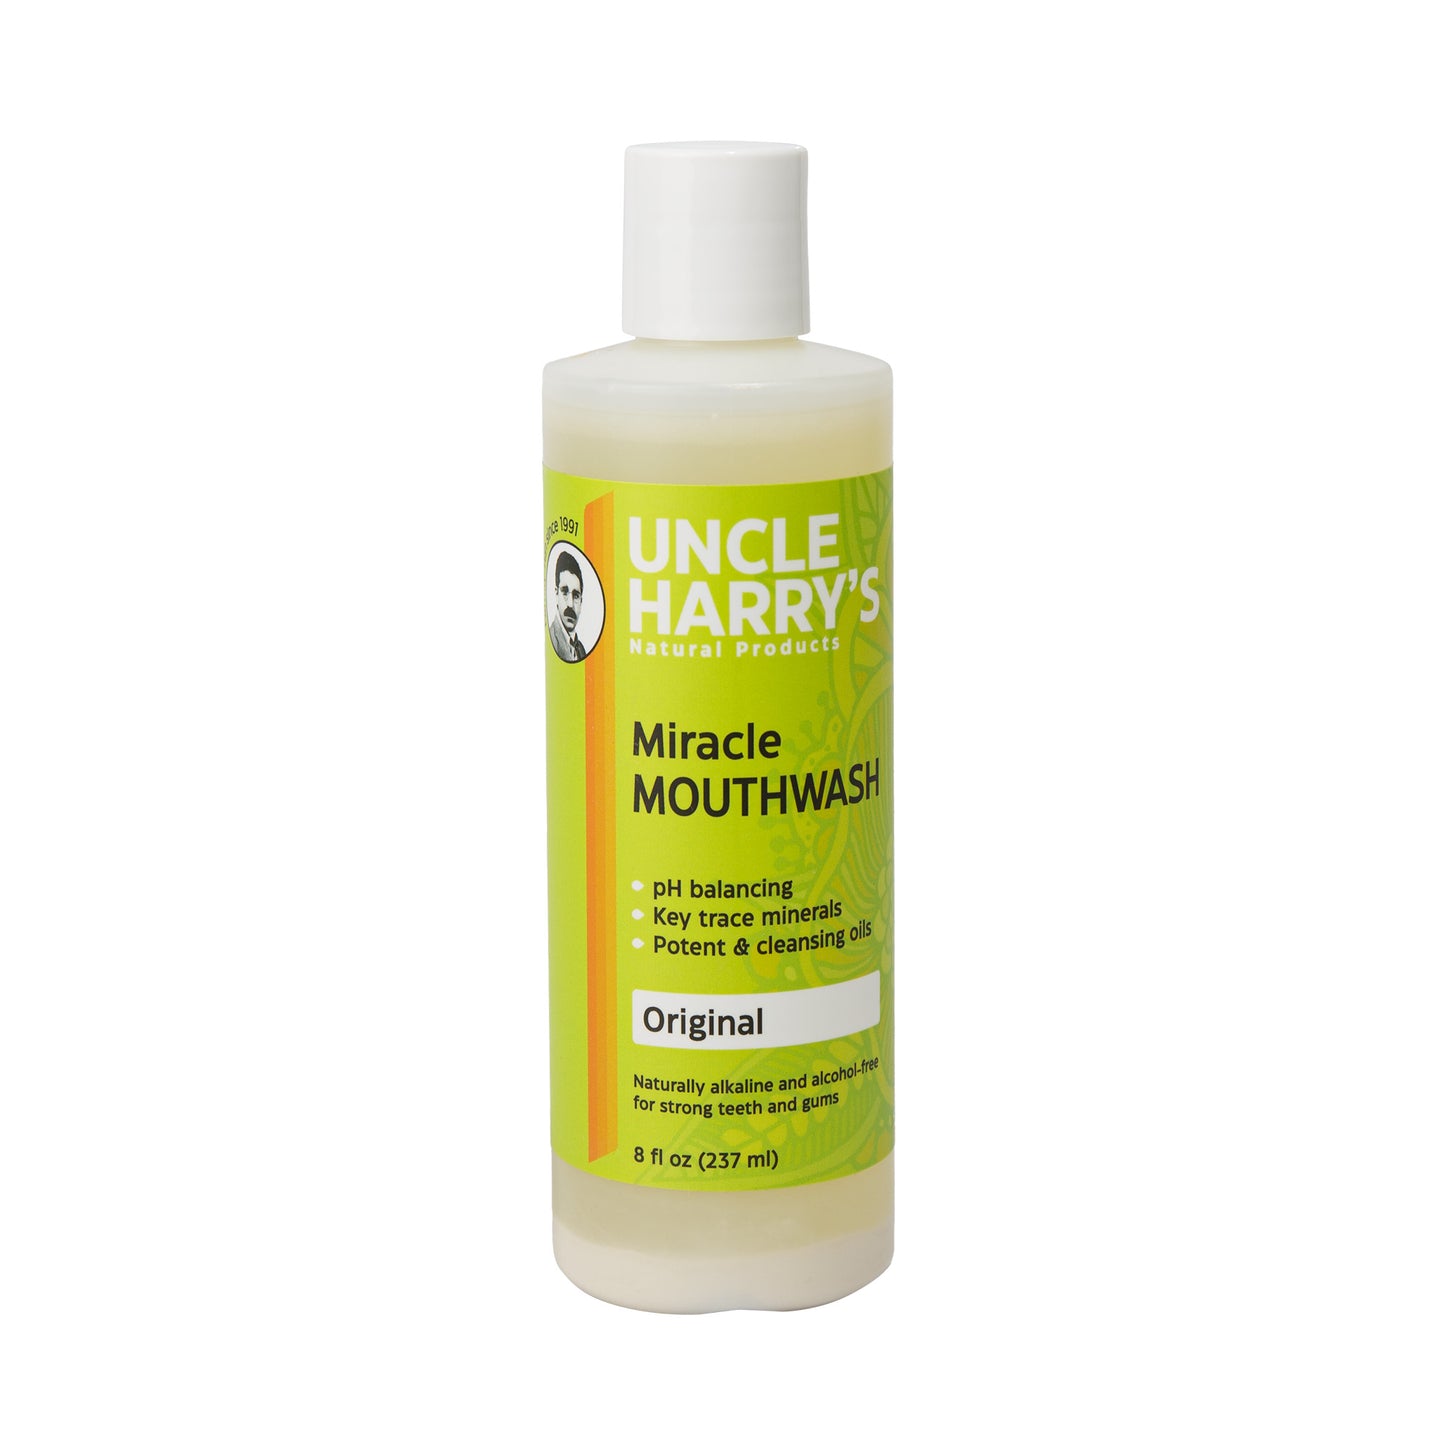 Primary image of Miracle Mouthwash